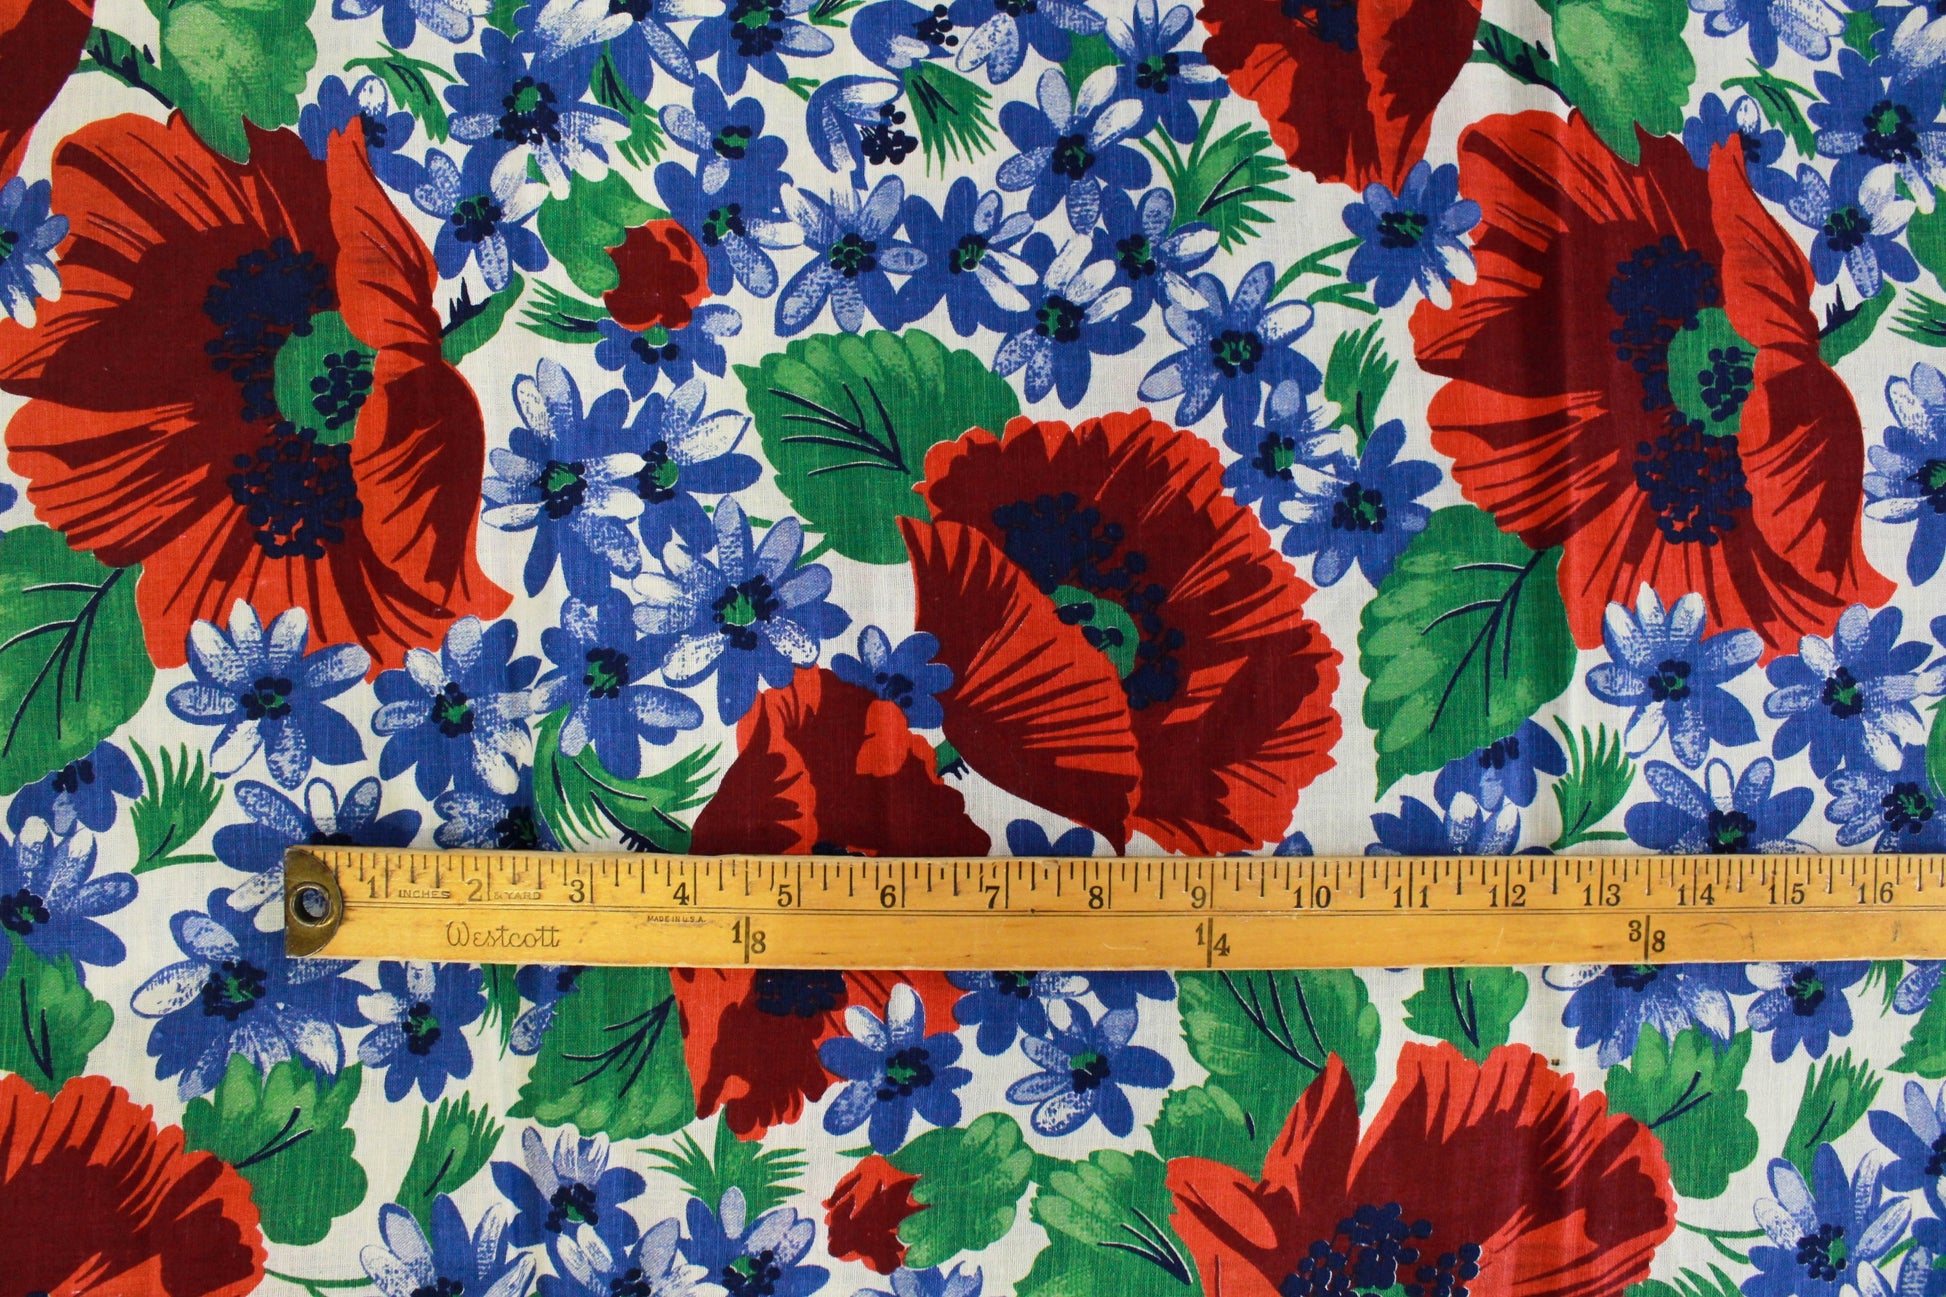 70s Retro Floral Fabric Collection - 1 Yard Bundle